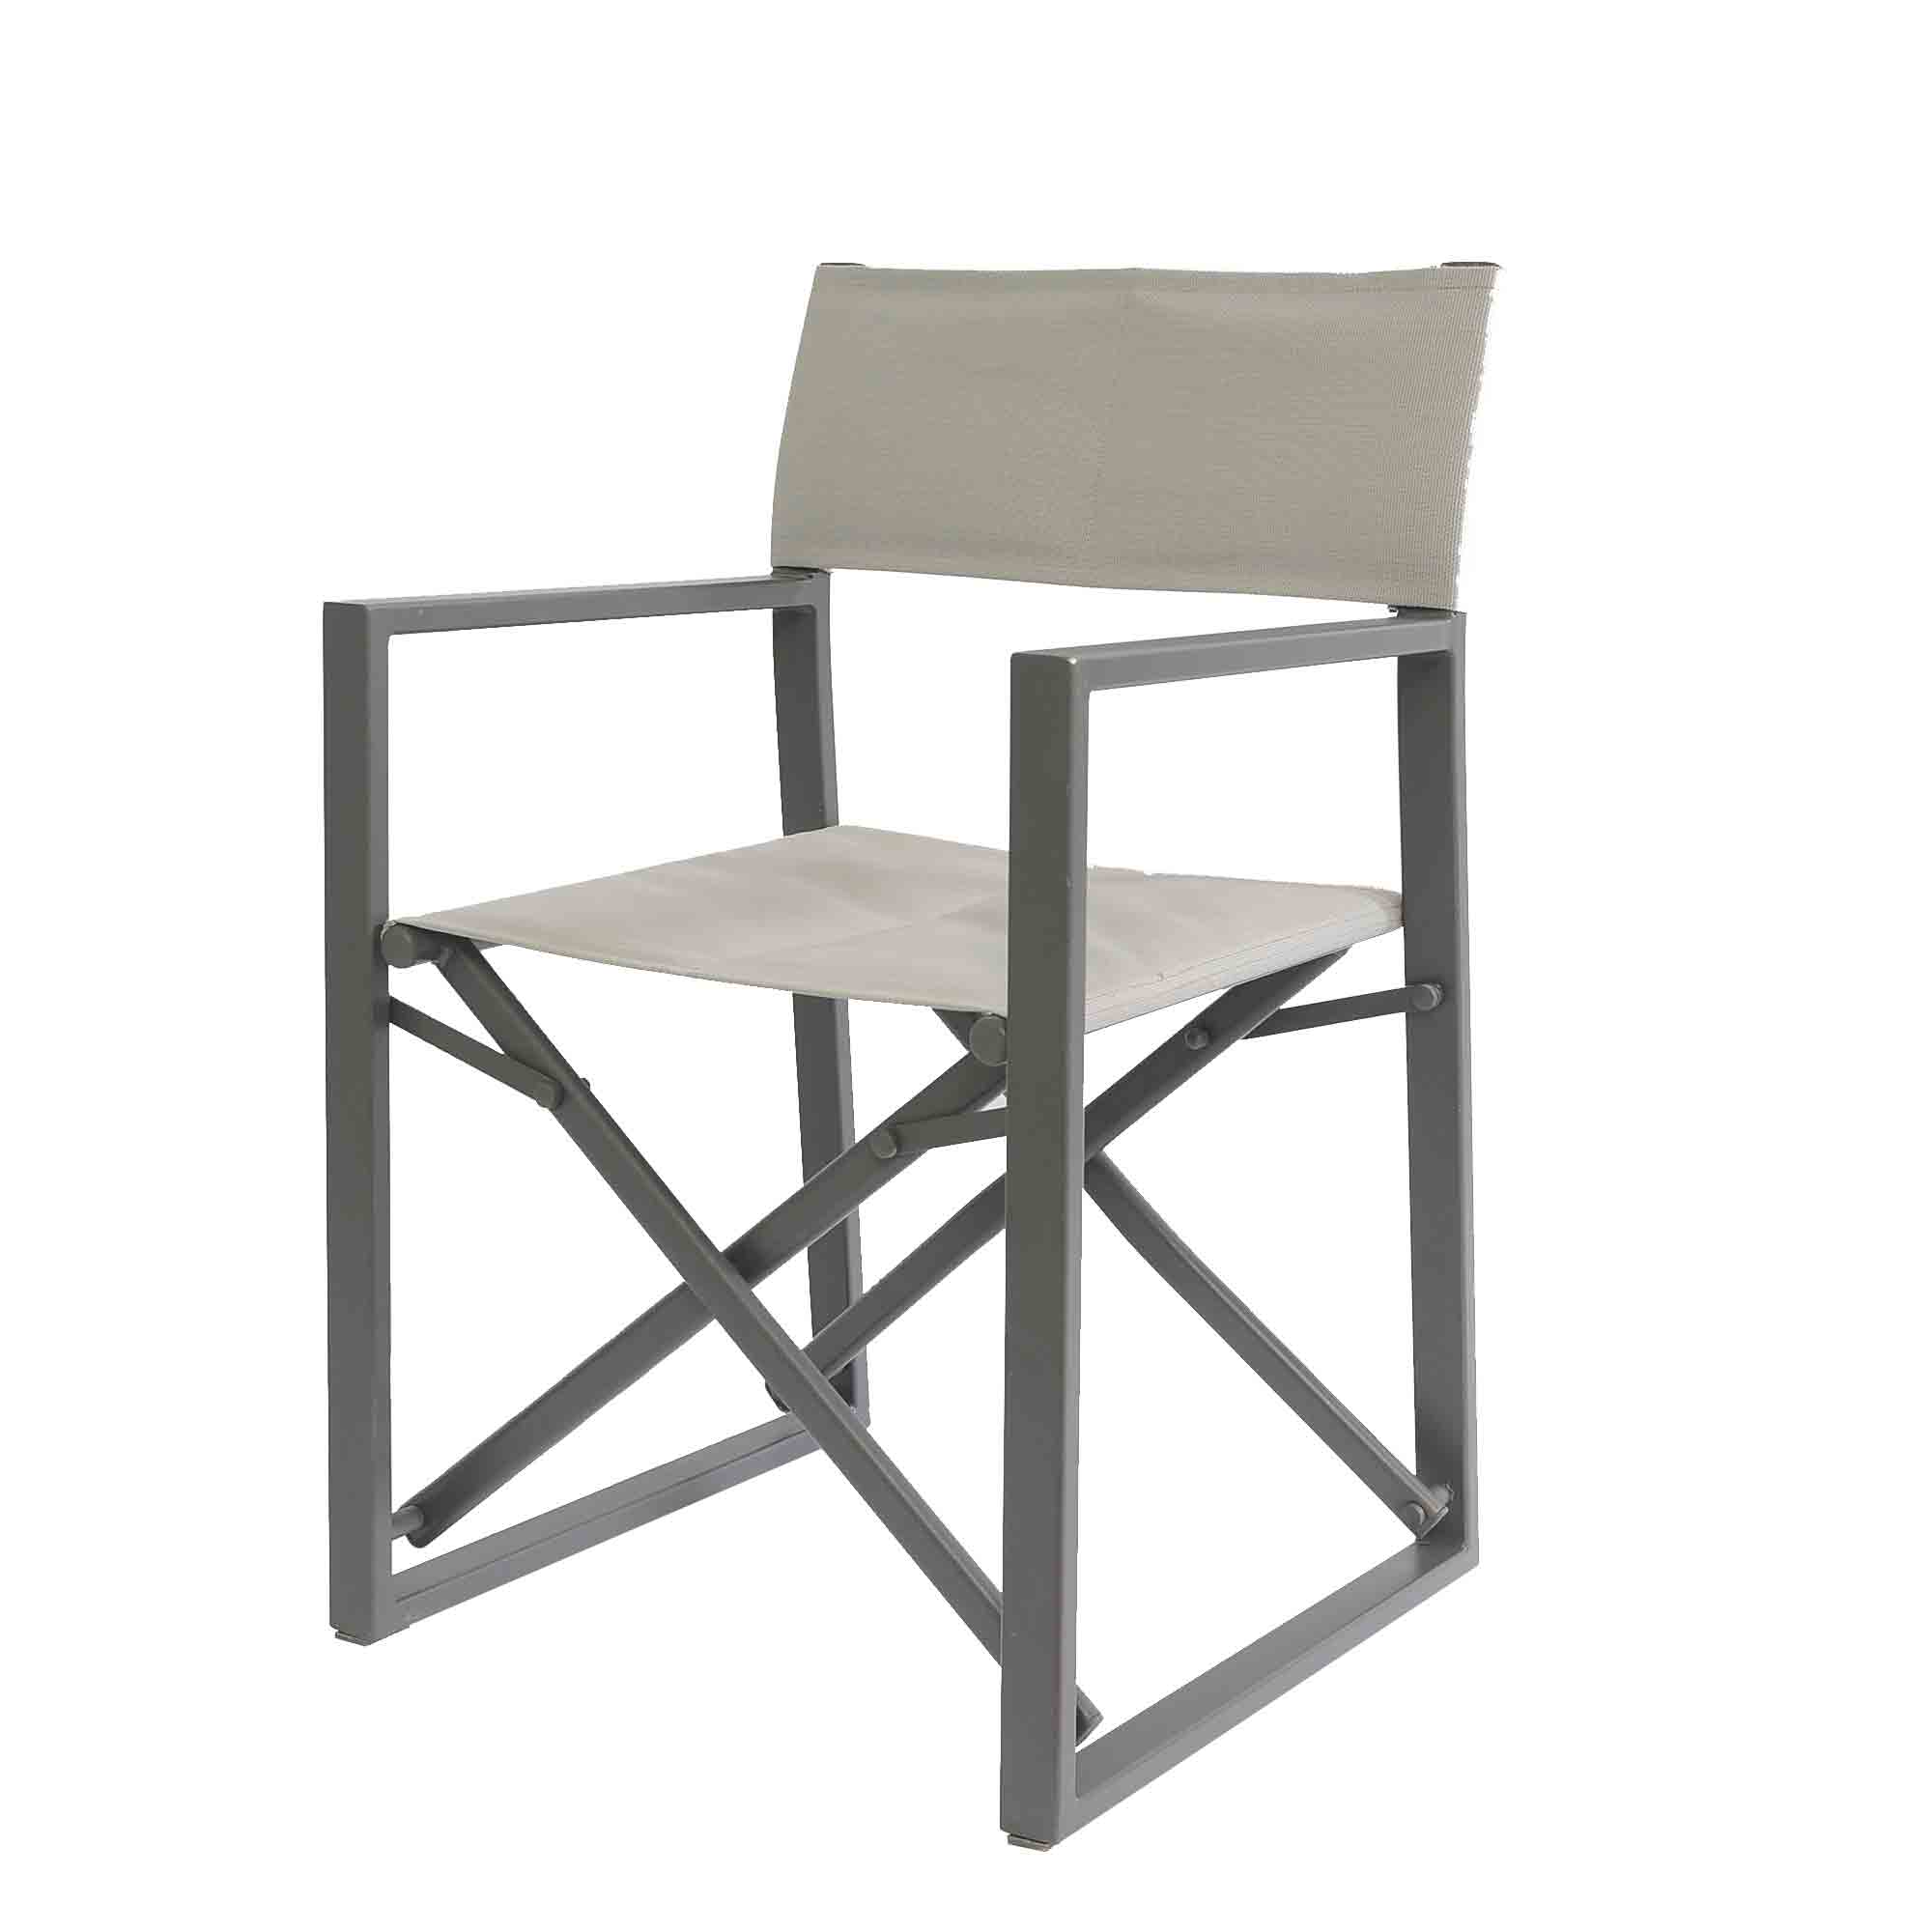 2019 High quality Steel Chair - JJLXD-011 Aluminum camping folding chair – Jin-jiang Industry